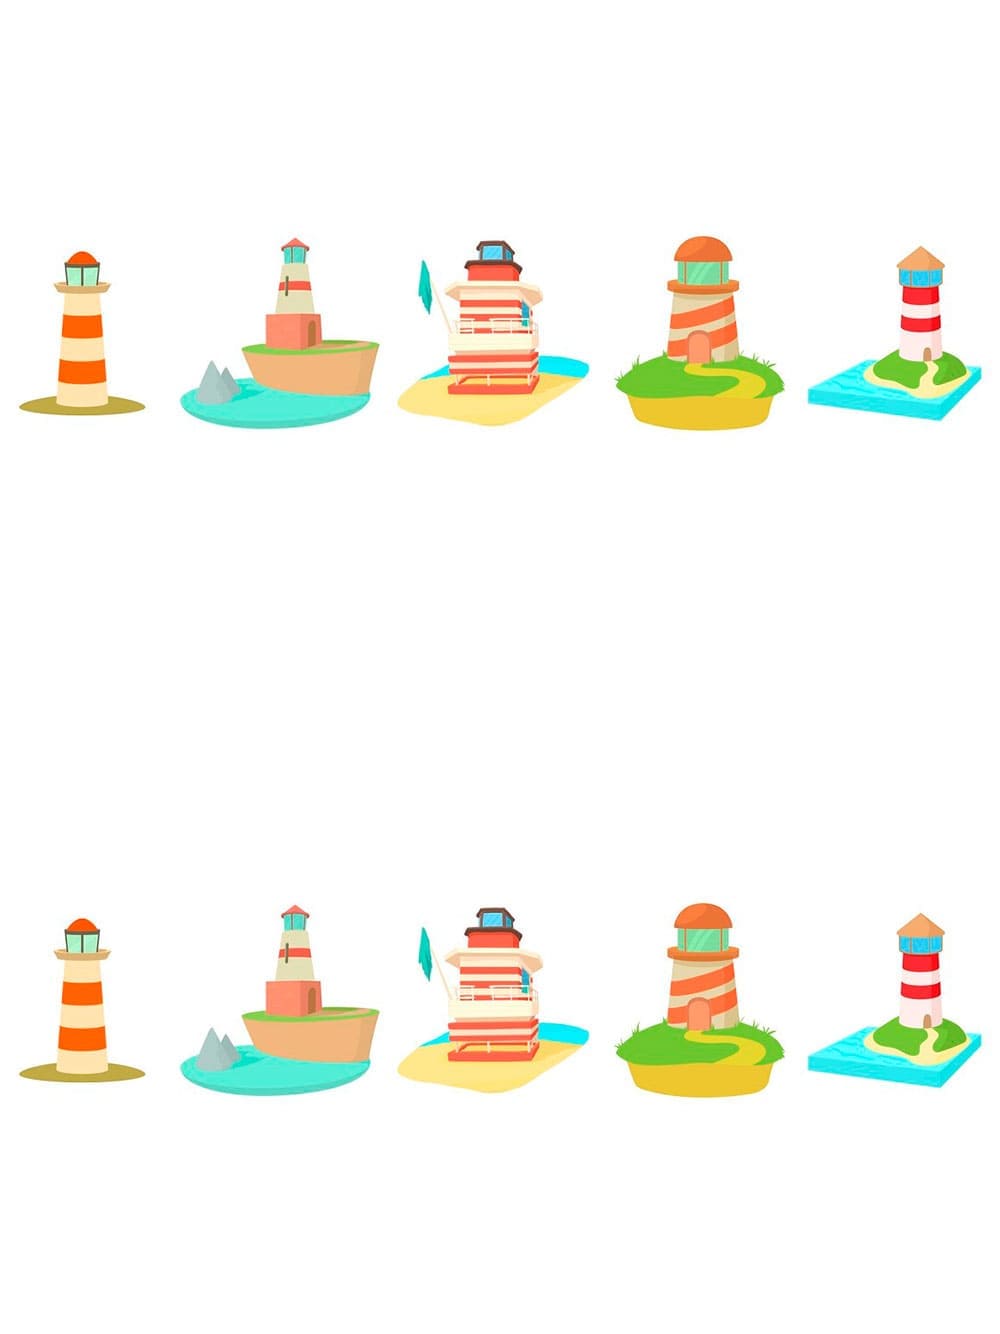 Light house icon set cartoon style, picture for pinterest.